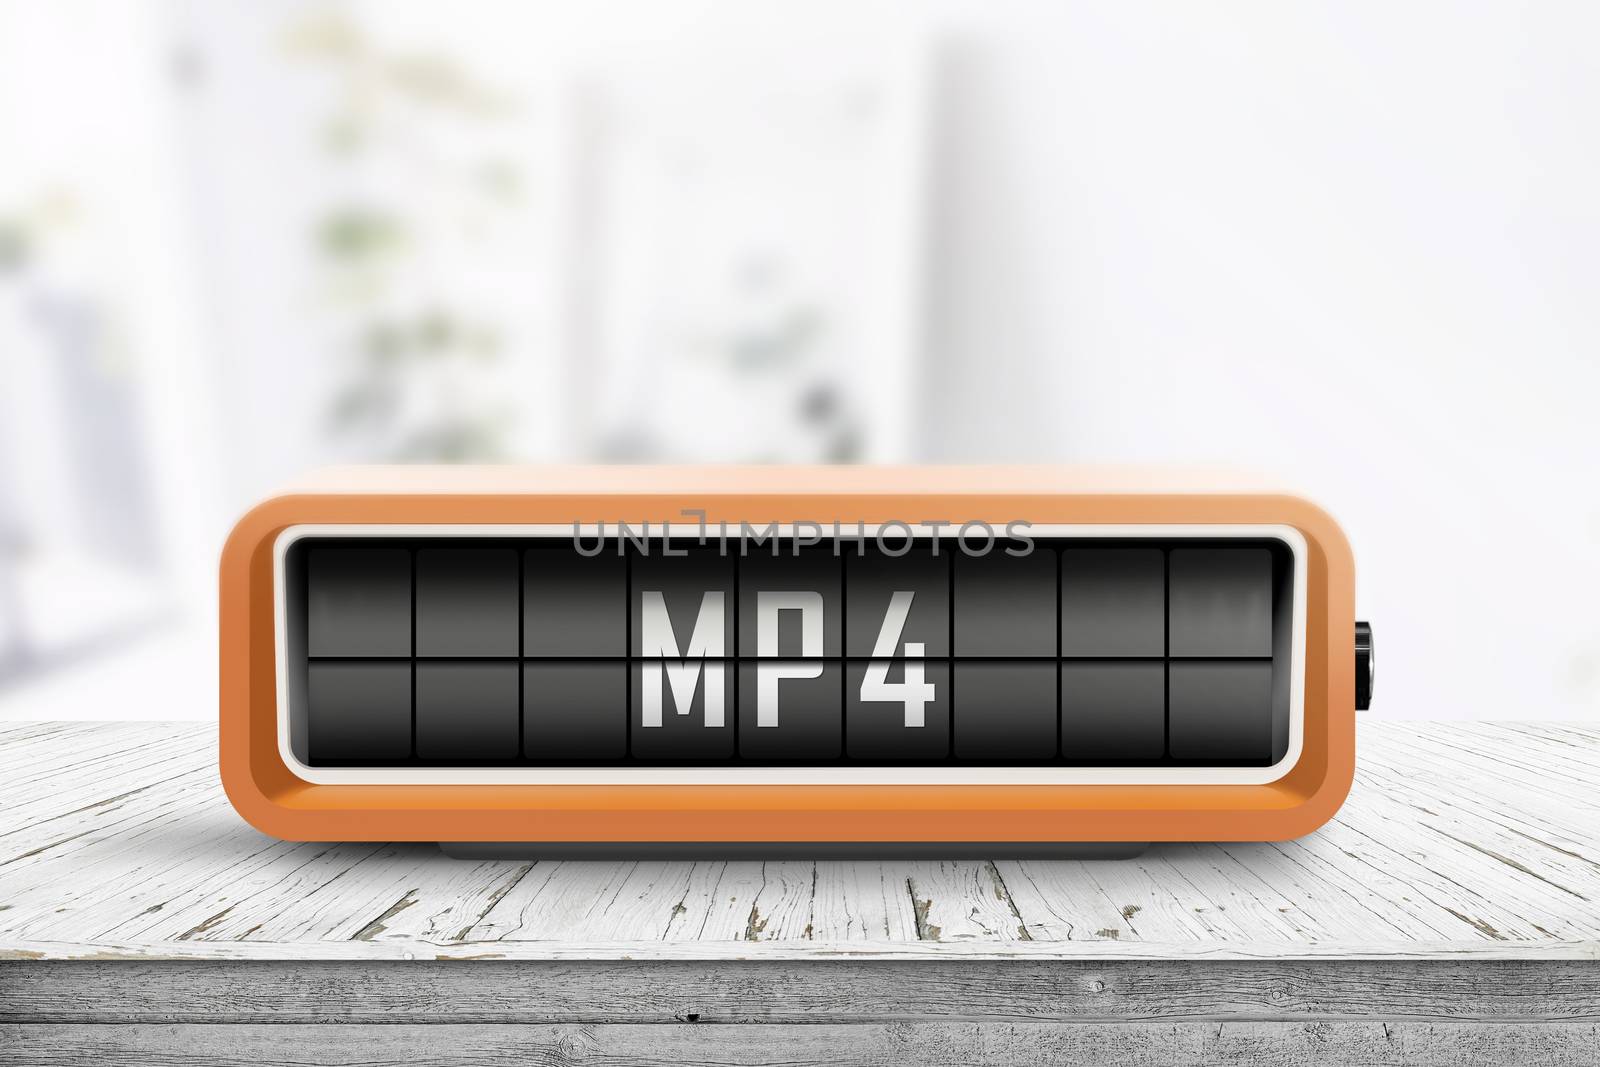 Mp4 sign on a analog device in a bright living room on a wooden desk